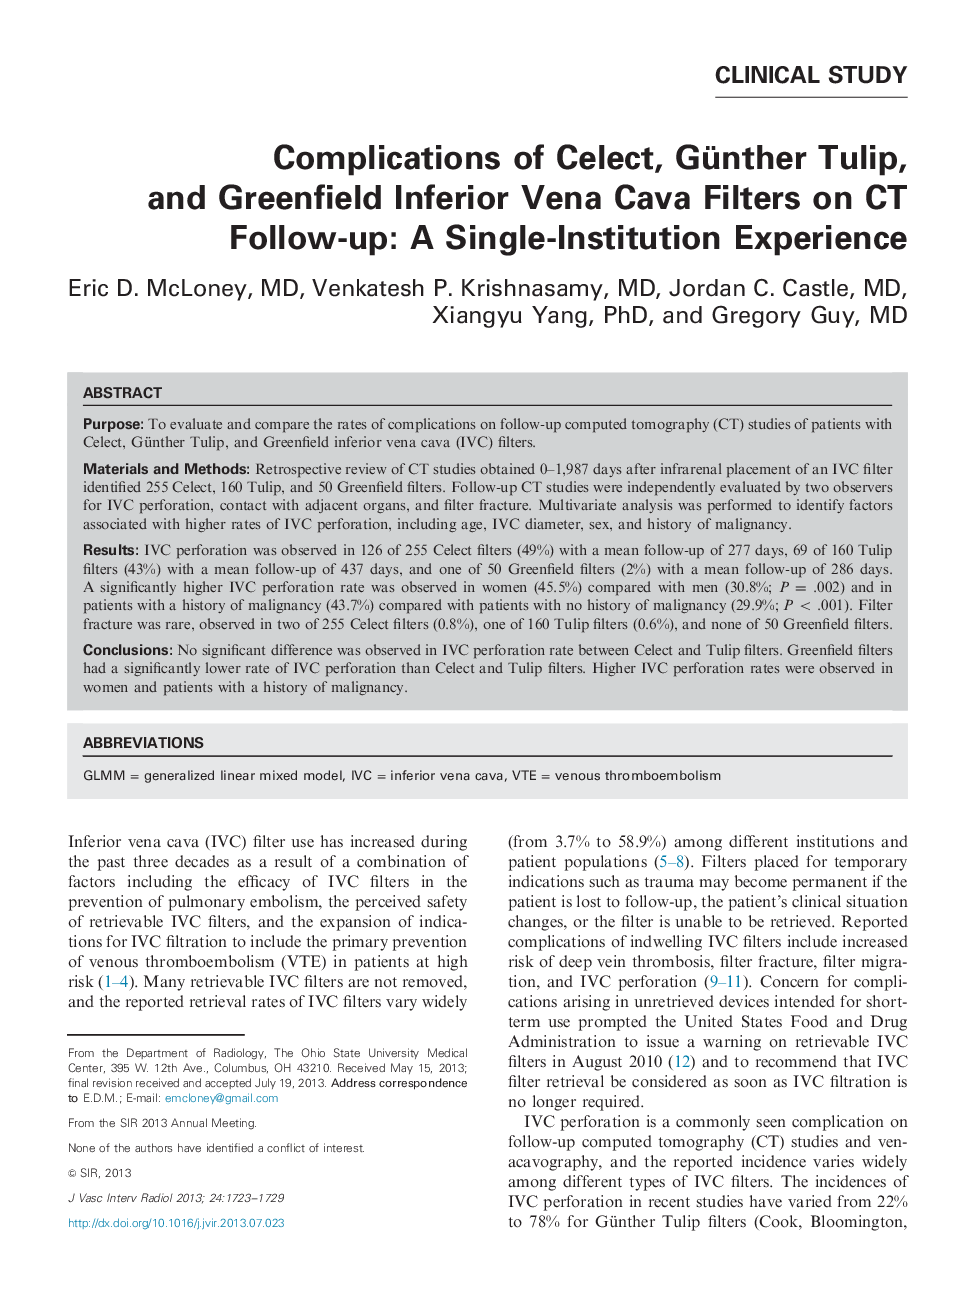 Complications of Celect, Günther Tulip, and Greenfield Inferior Vena Cava Filters on CT Follow-up: A Single-Institution Experience